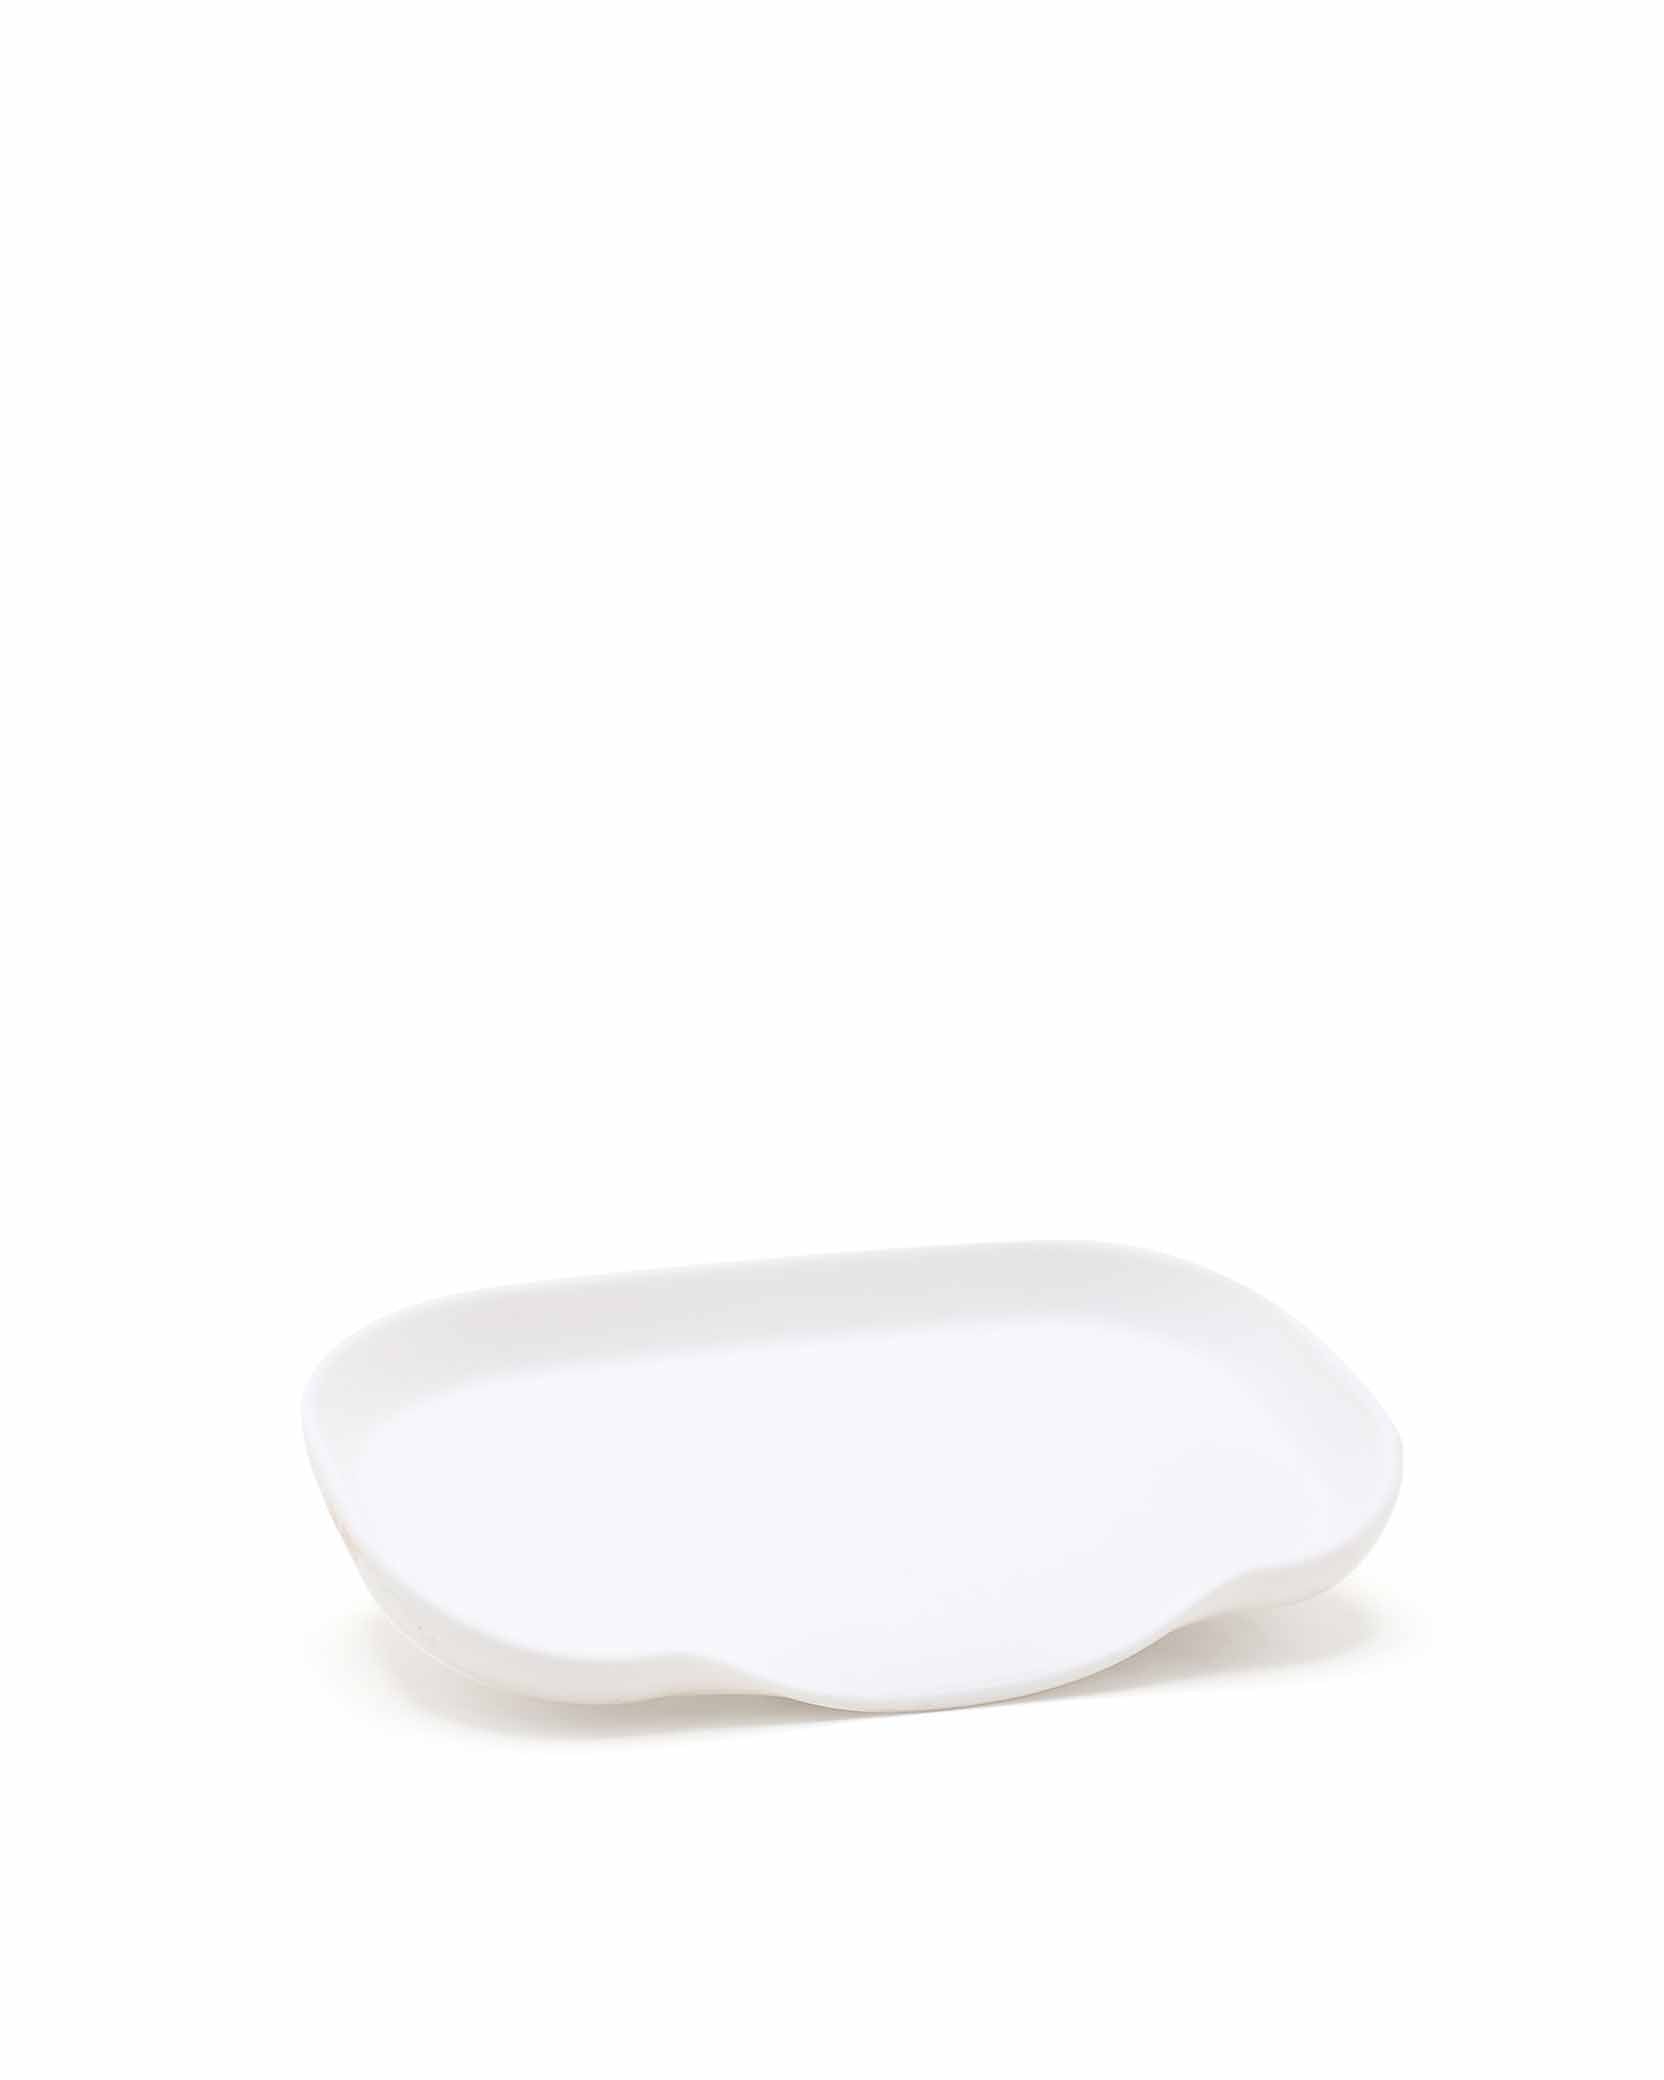 Soap Dish - Olive Oil Etcetera 